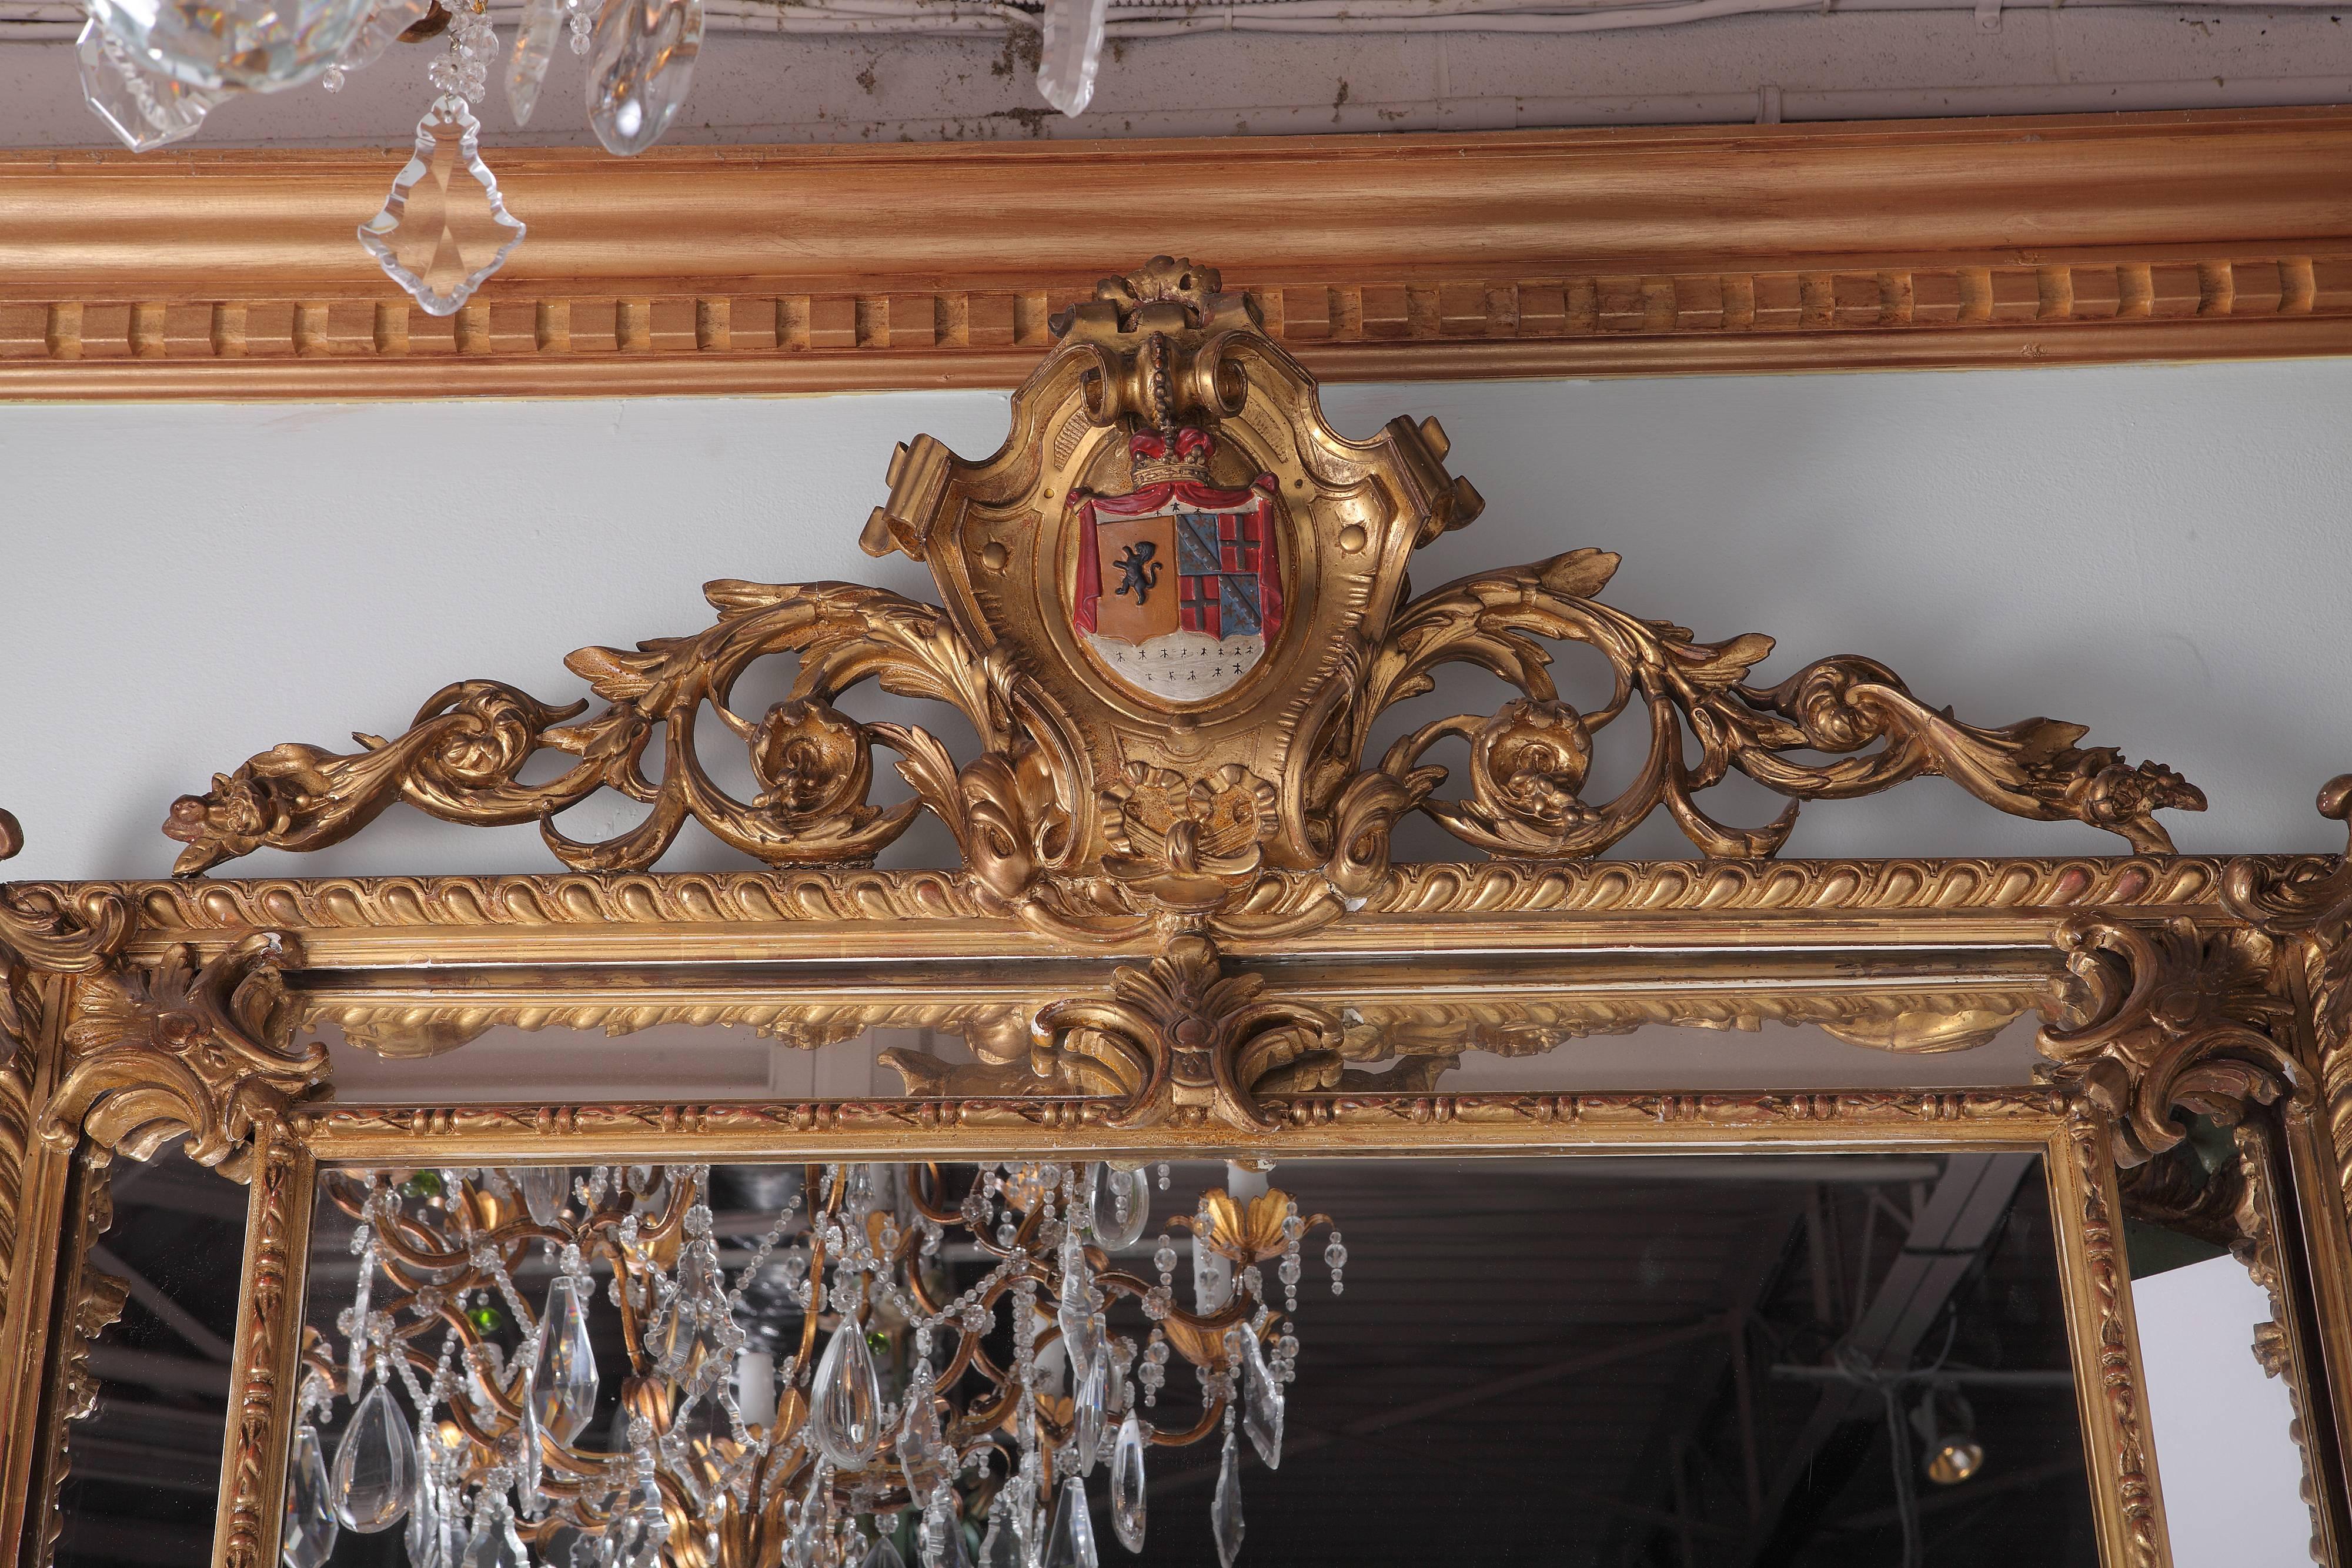 Late 19th century French gilt overmantle mirror. Cushion mirror has family crest centered in cartouche.